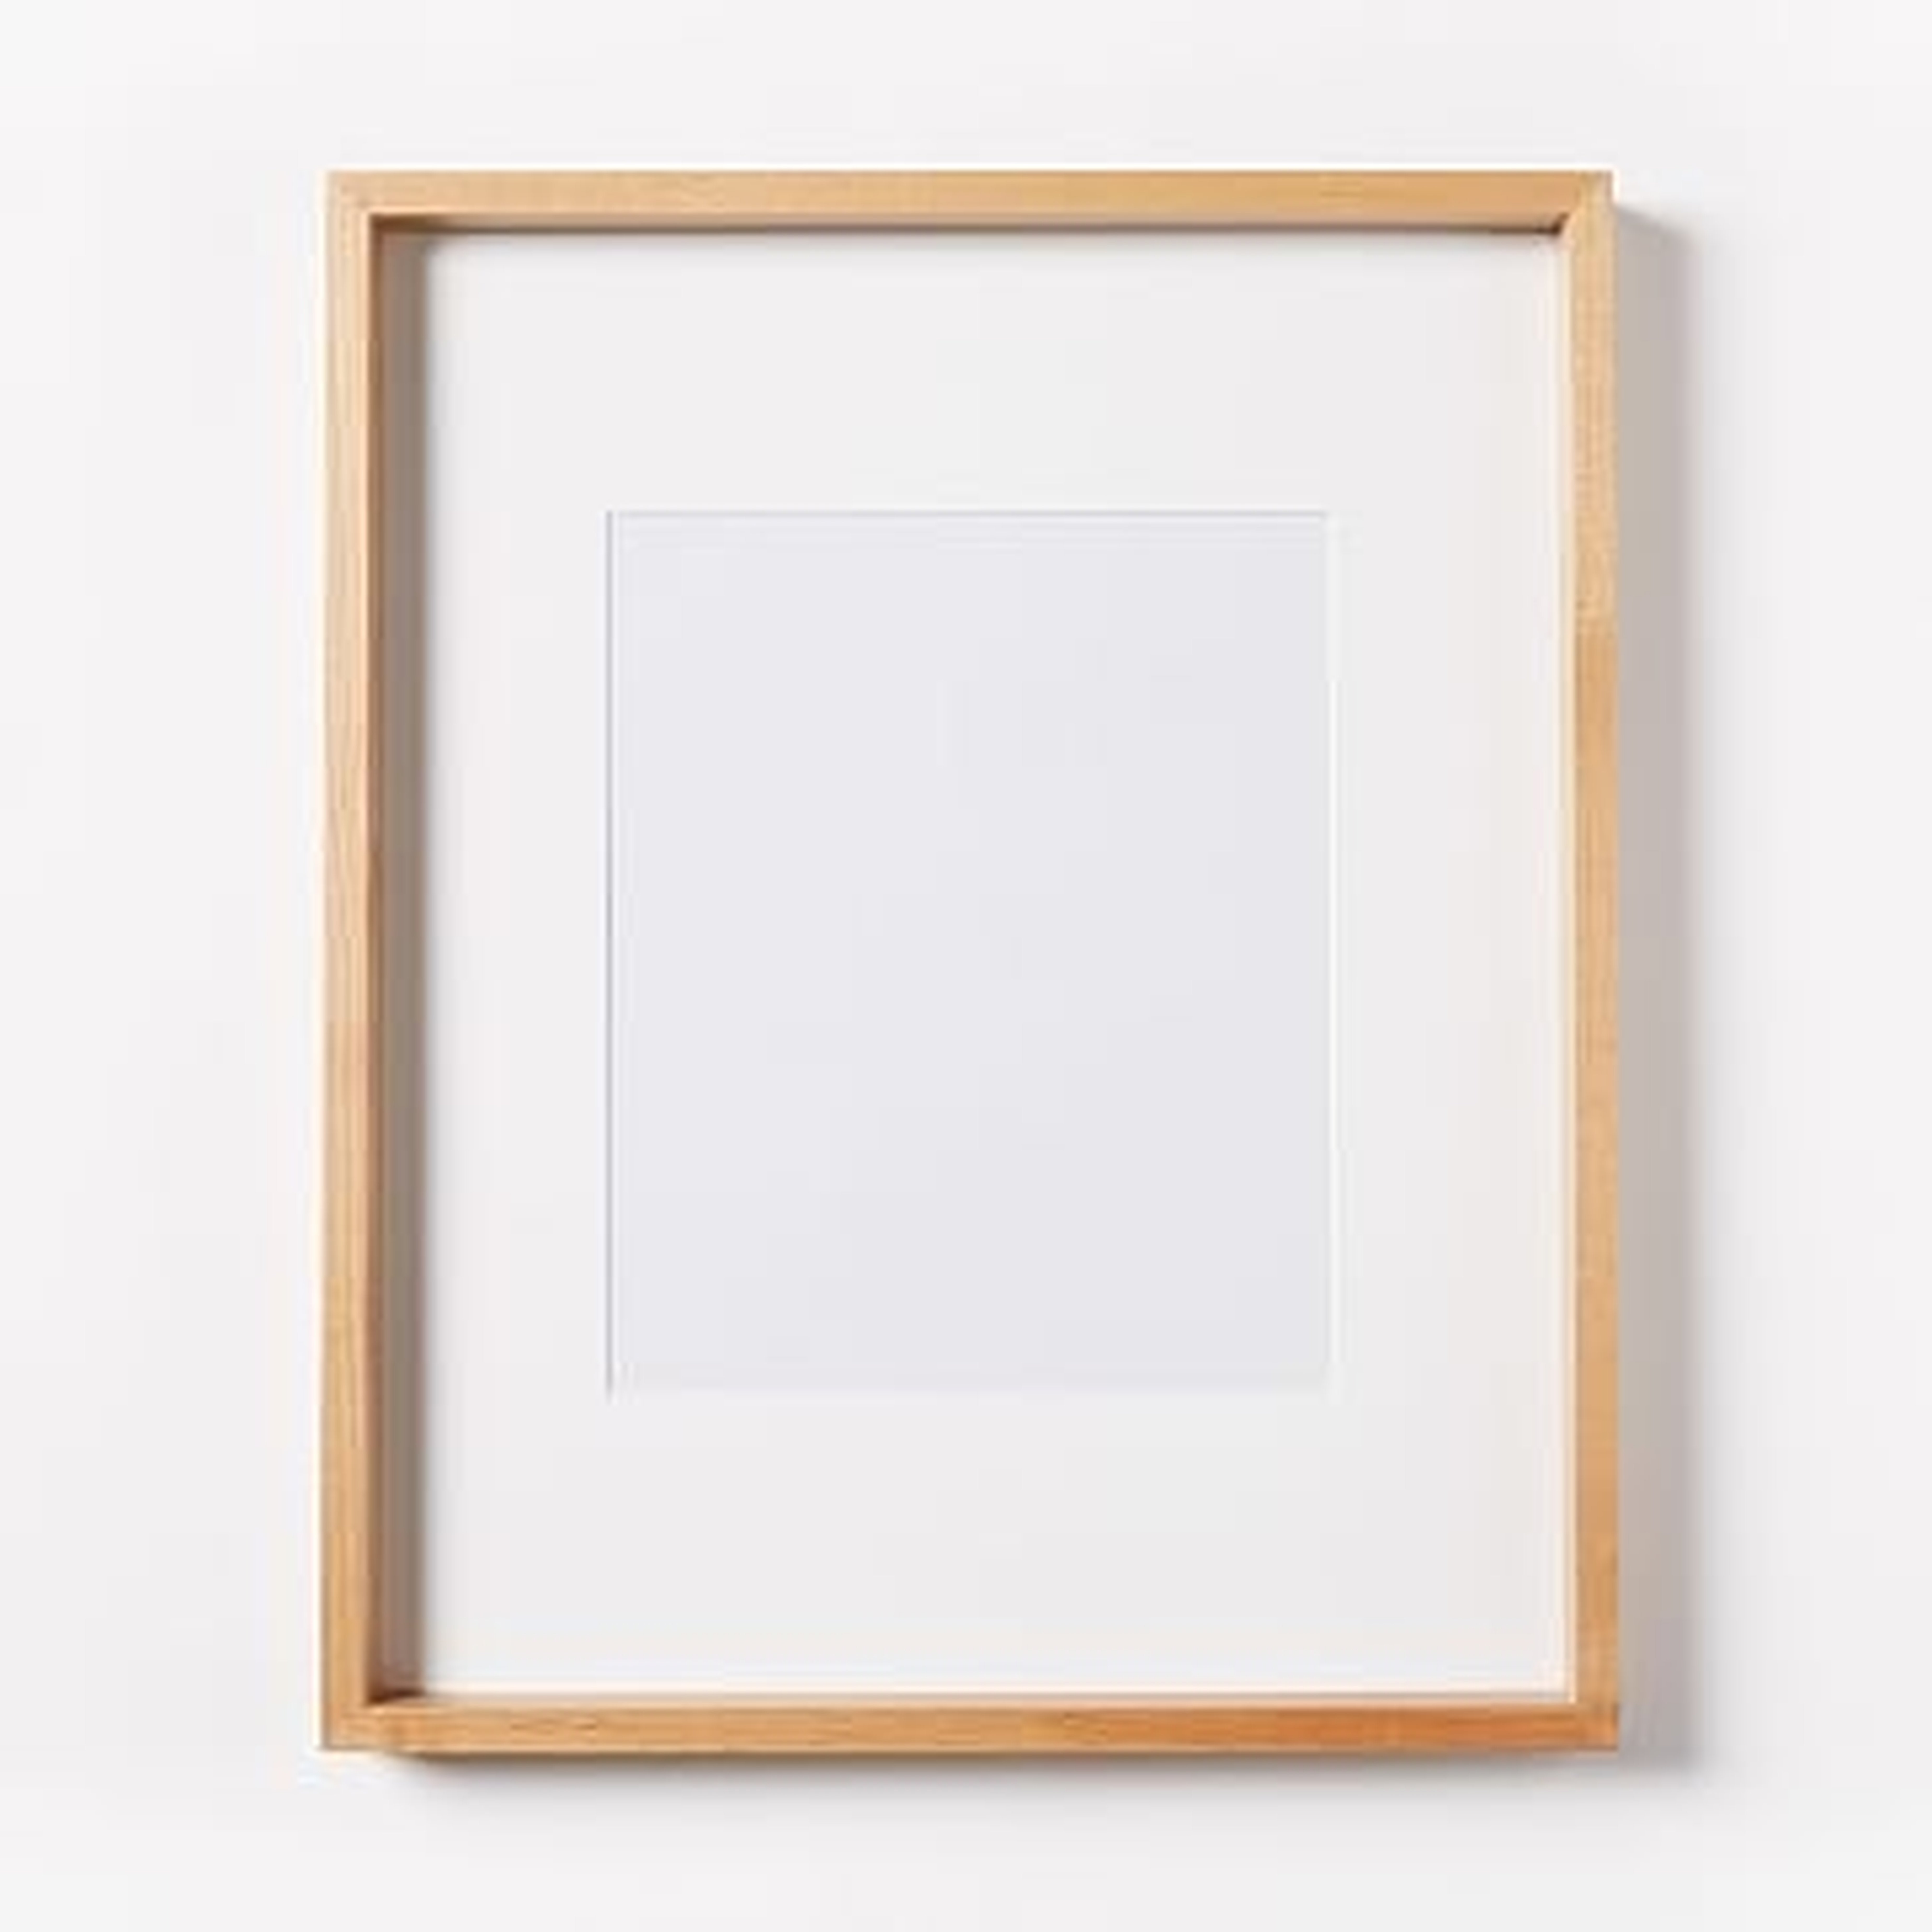 Thin Wood Gallery Frame, Bamboo, Individual, 8"x 10" (13" x 16" without mat) - West Elm